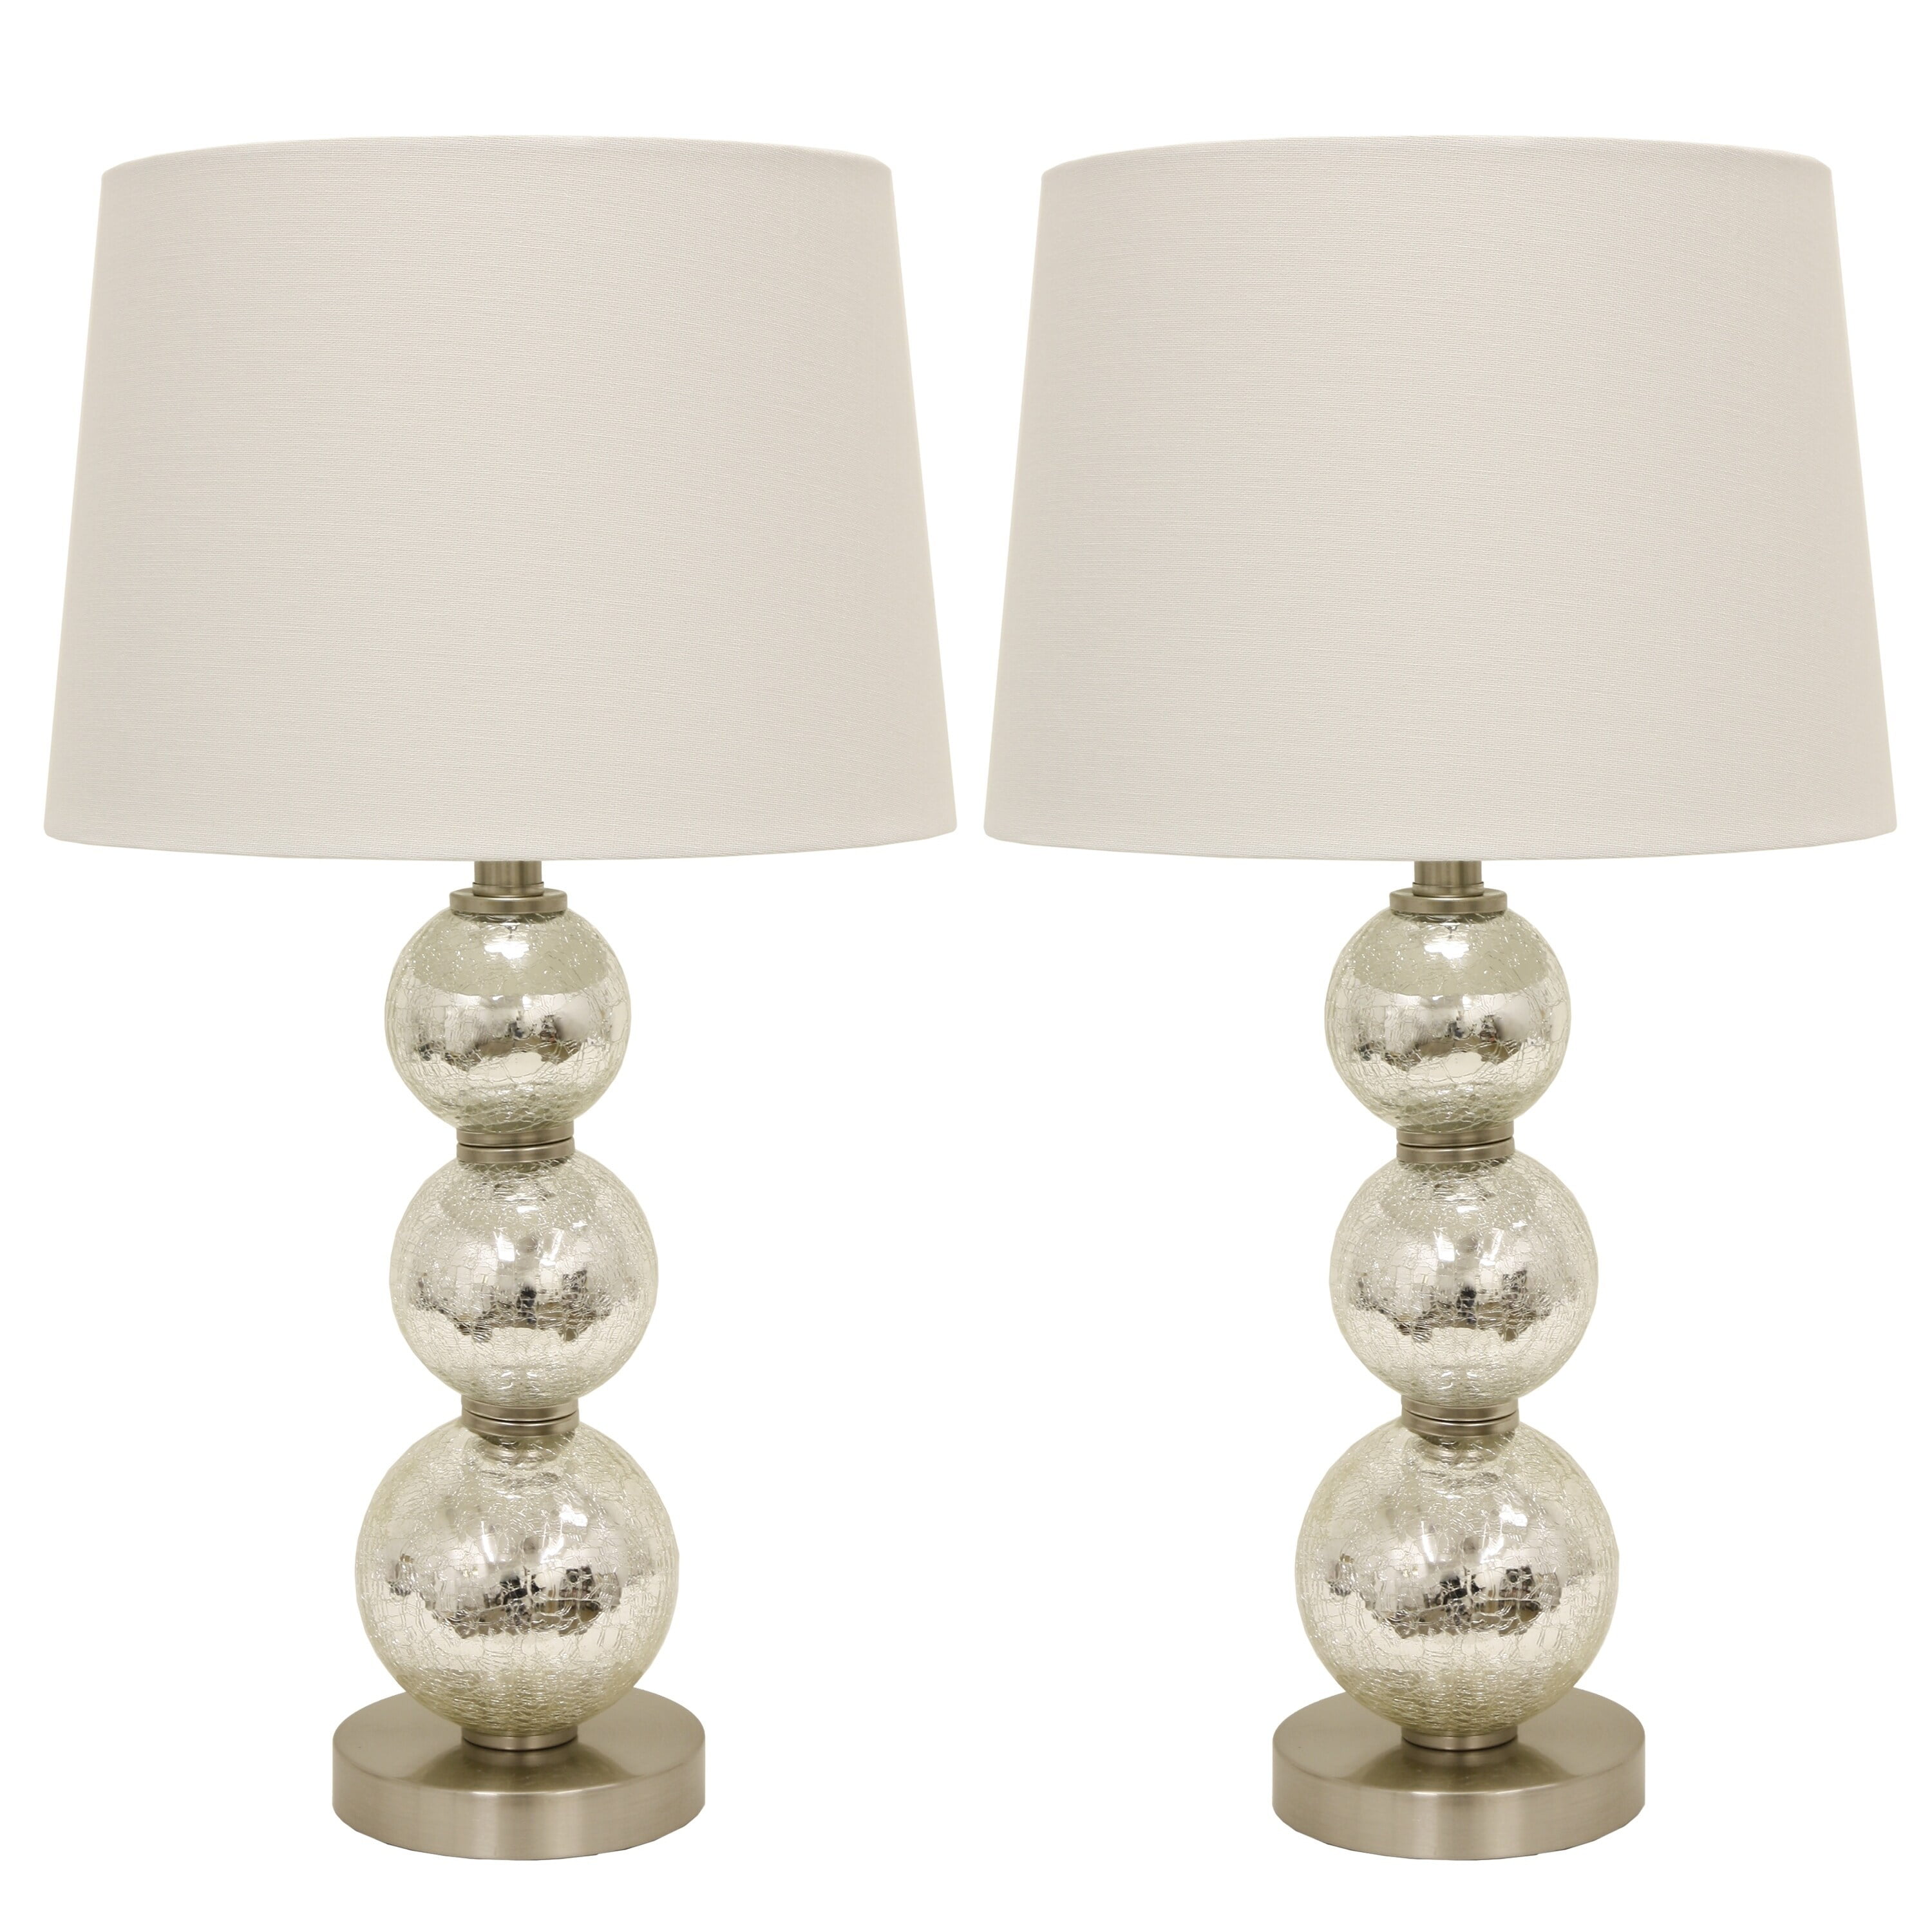 Set of 2 Tri-Tiered Glass Table Lamps 